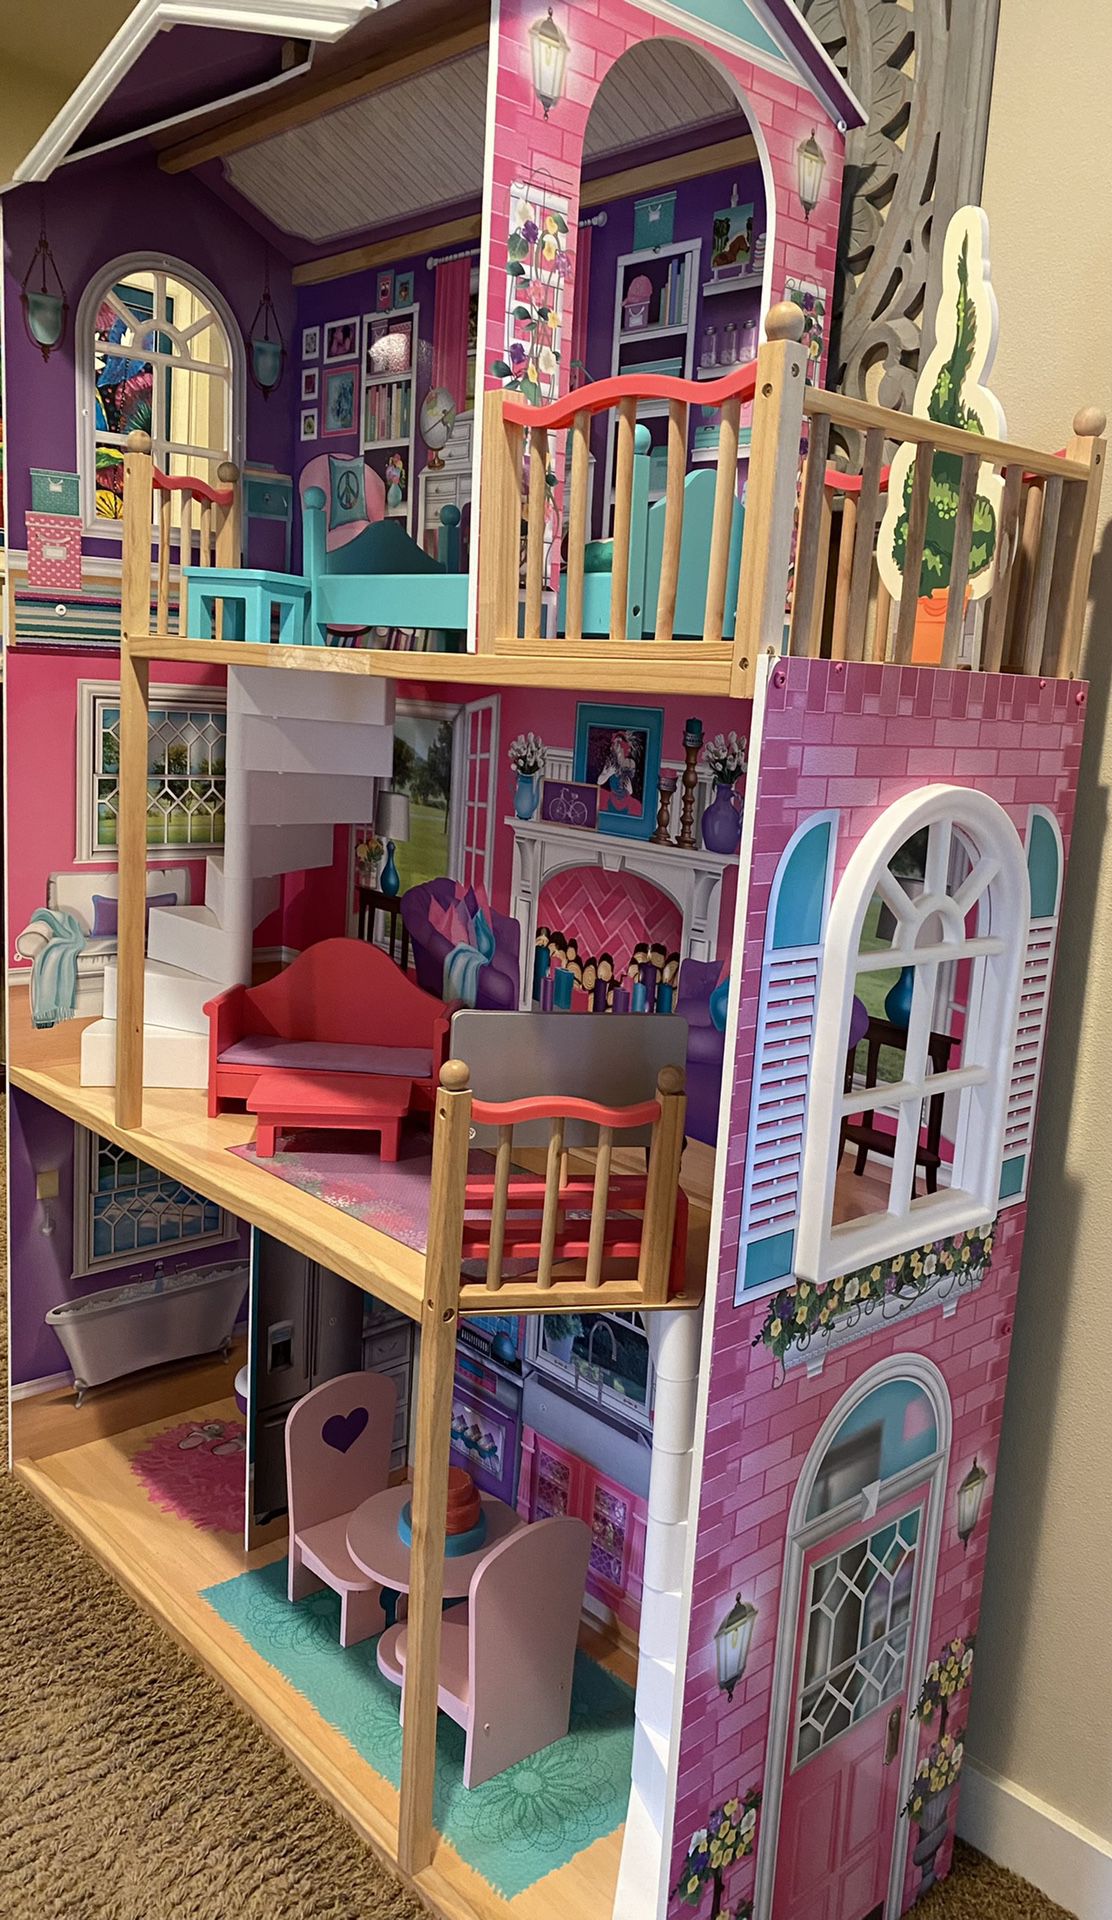 Dollhouse for 18” dolls for Sale in Bothell, WA - OfferUp